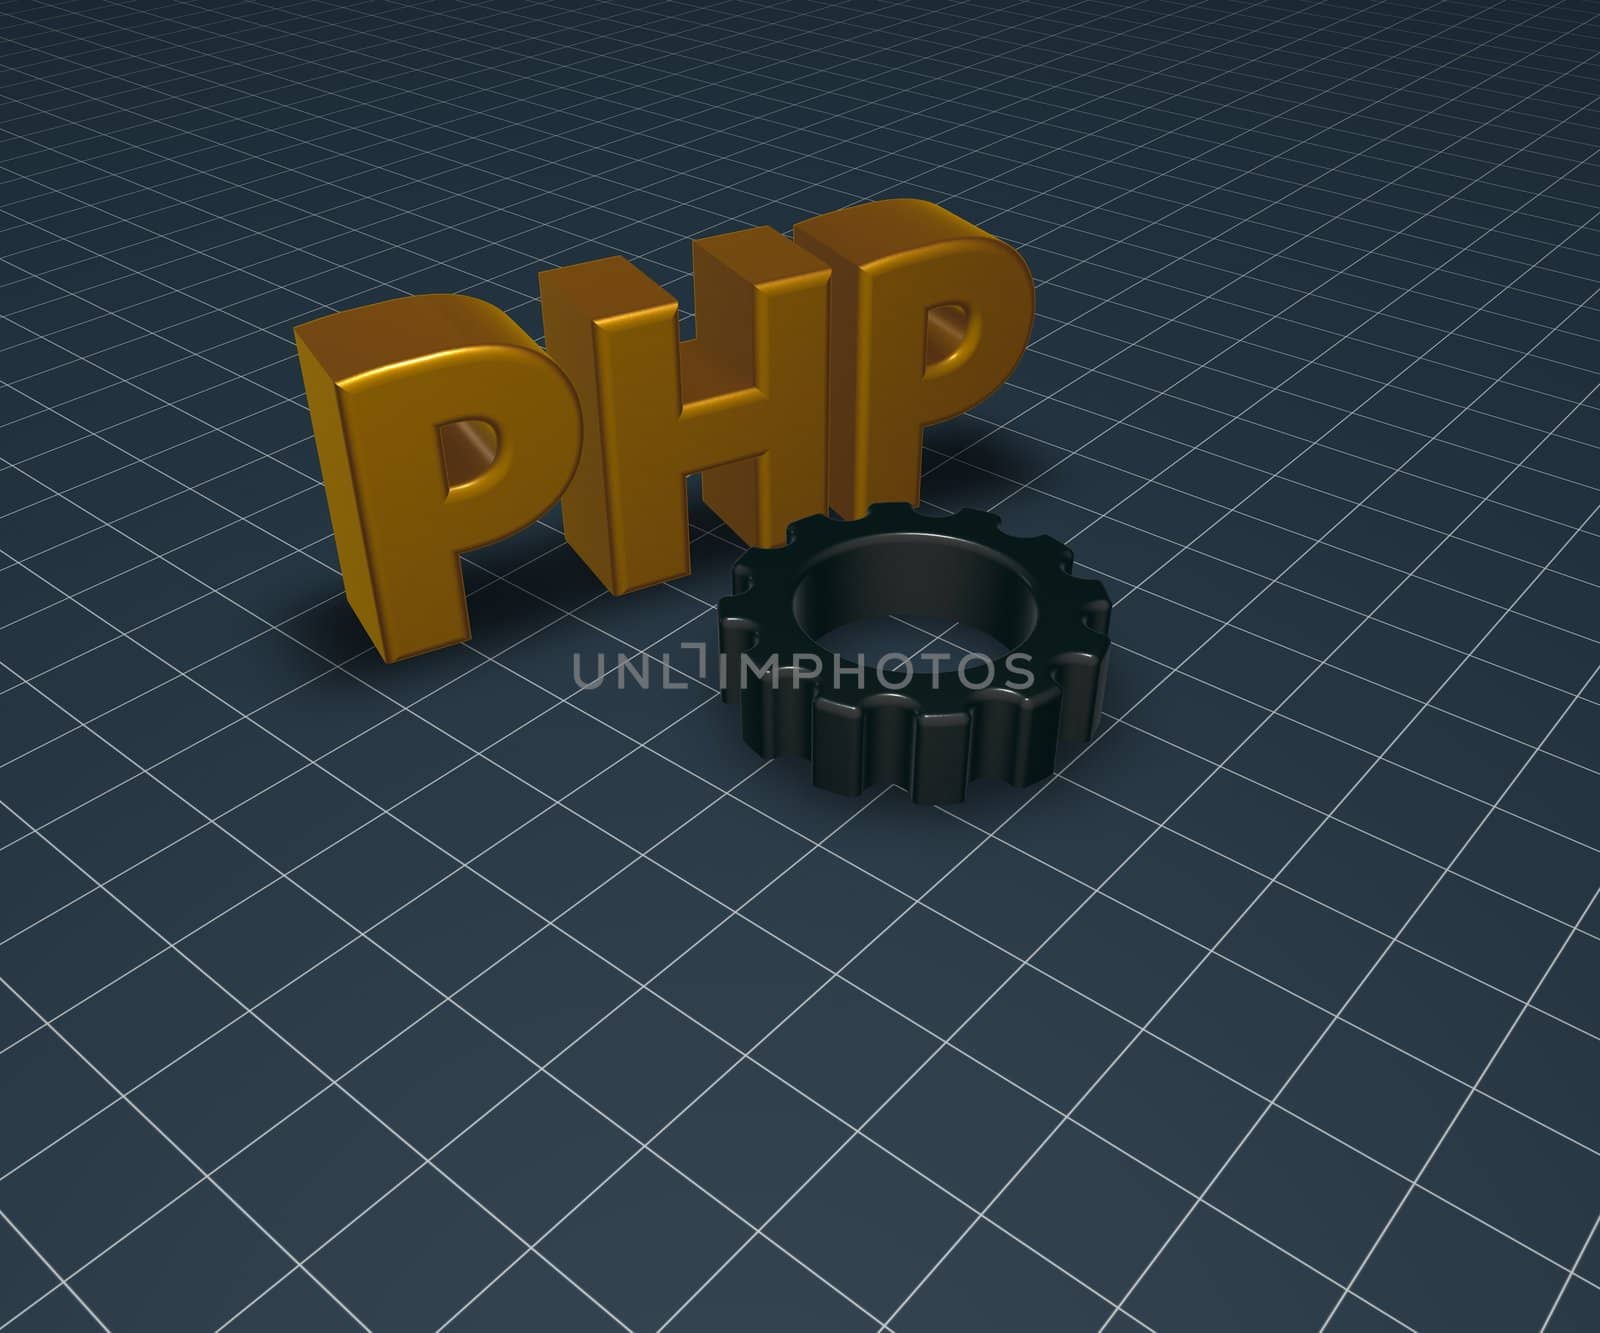 php tag and gear wheel - 3d illustration